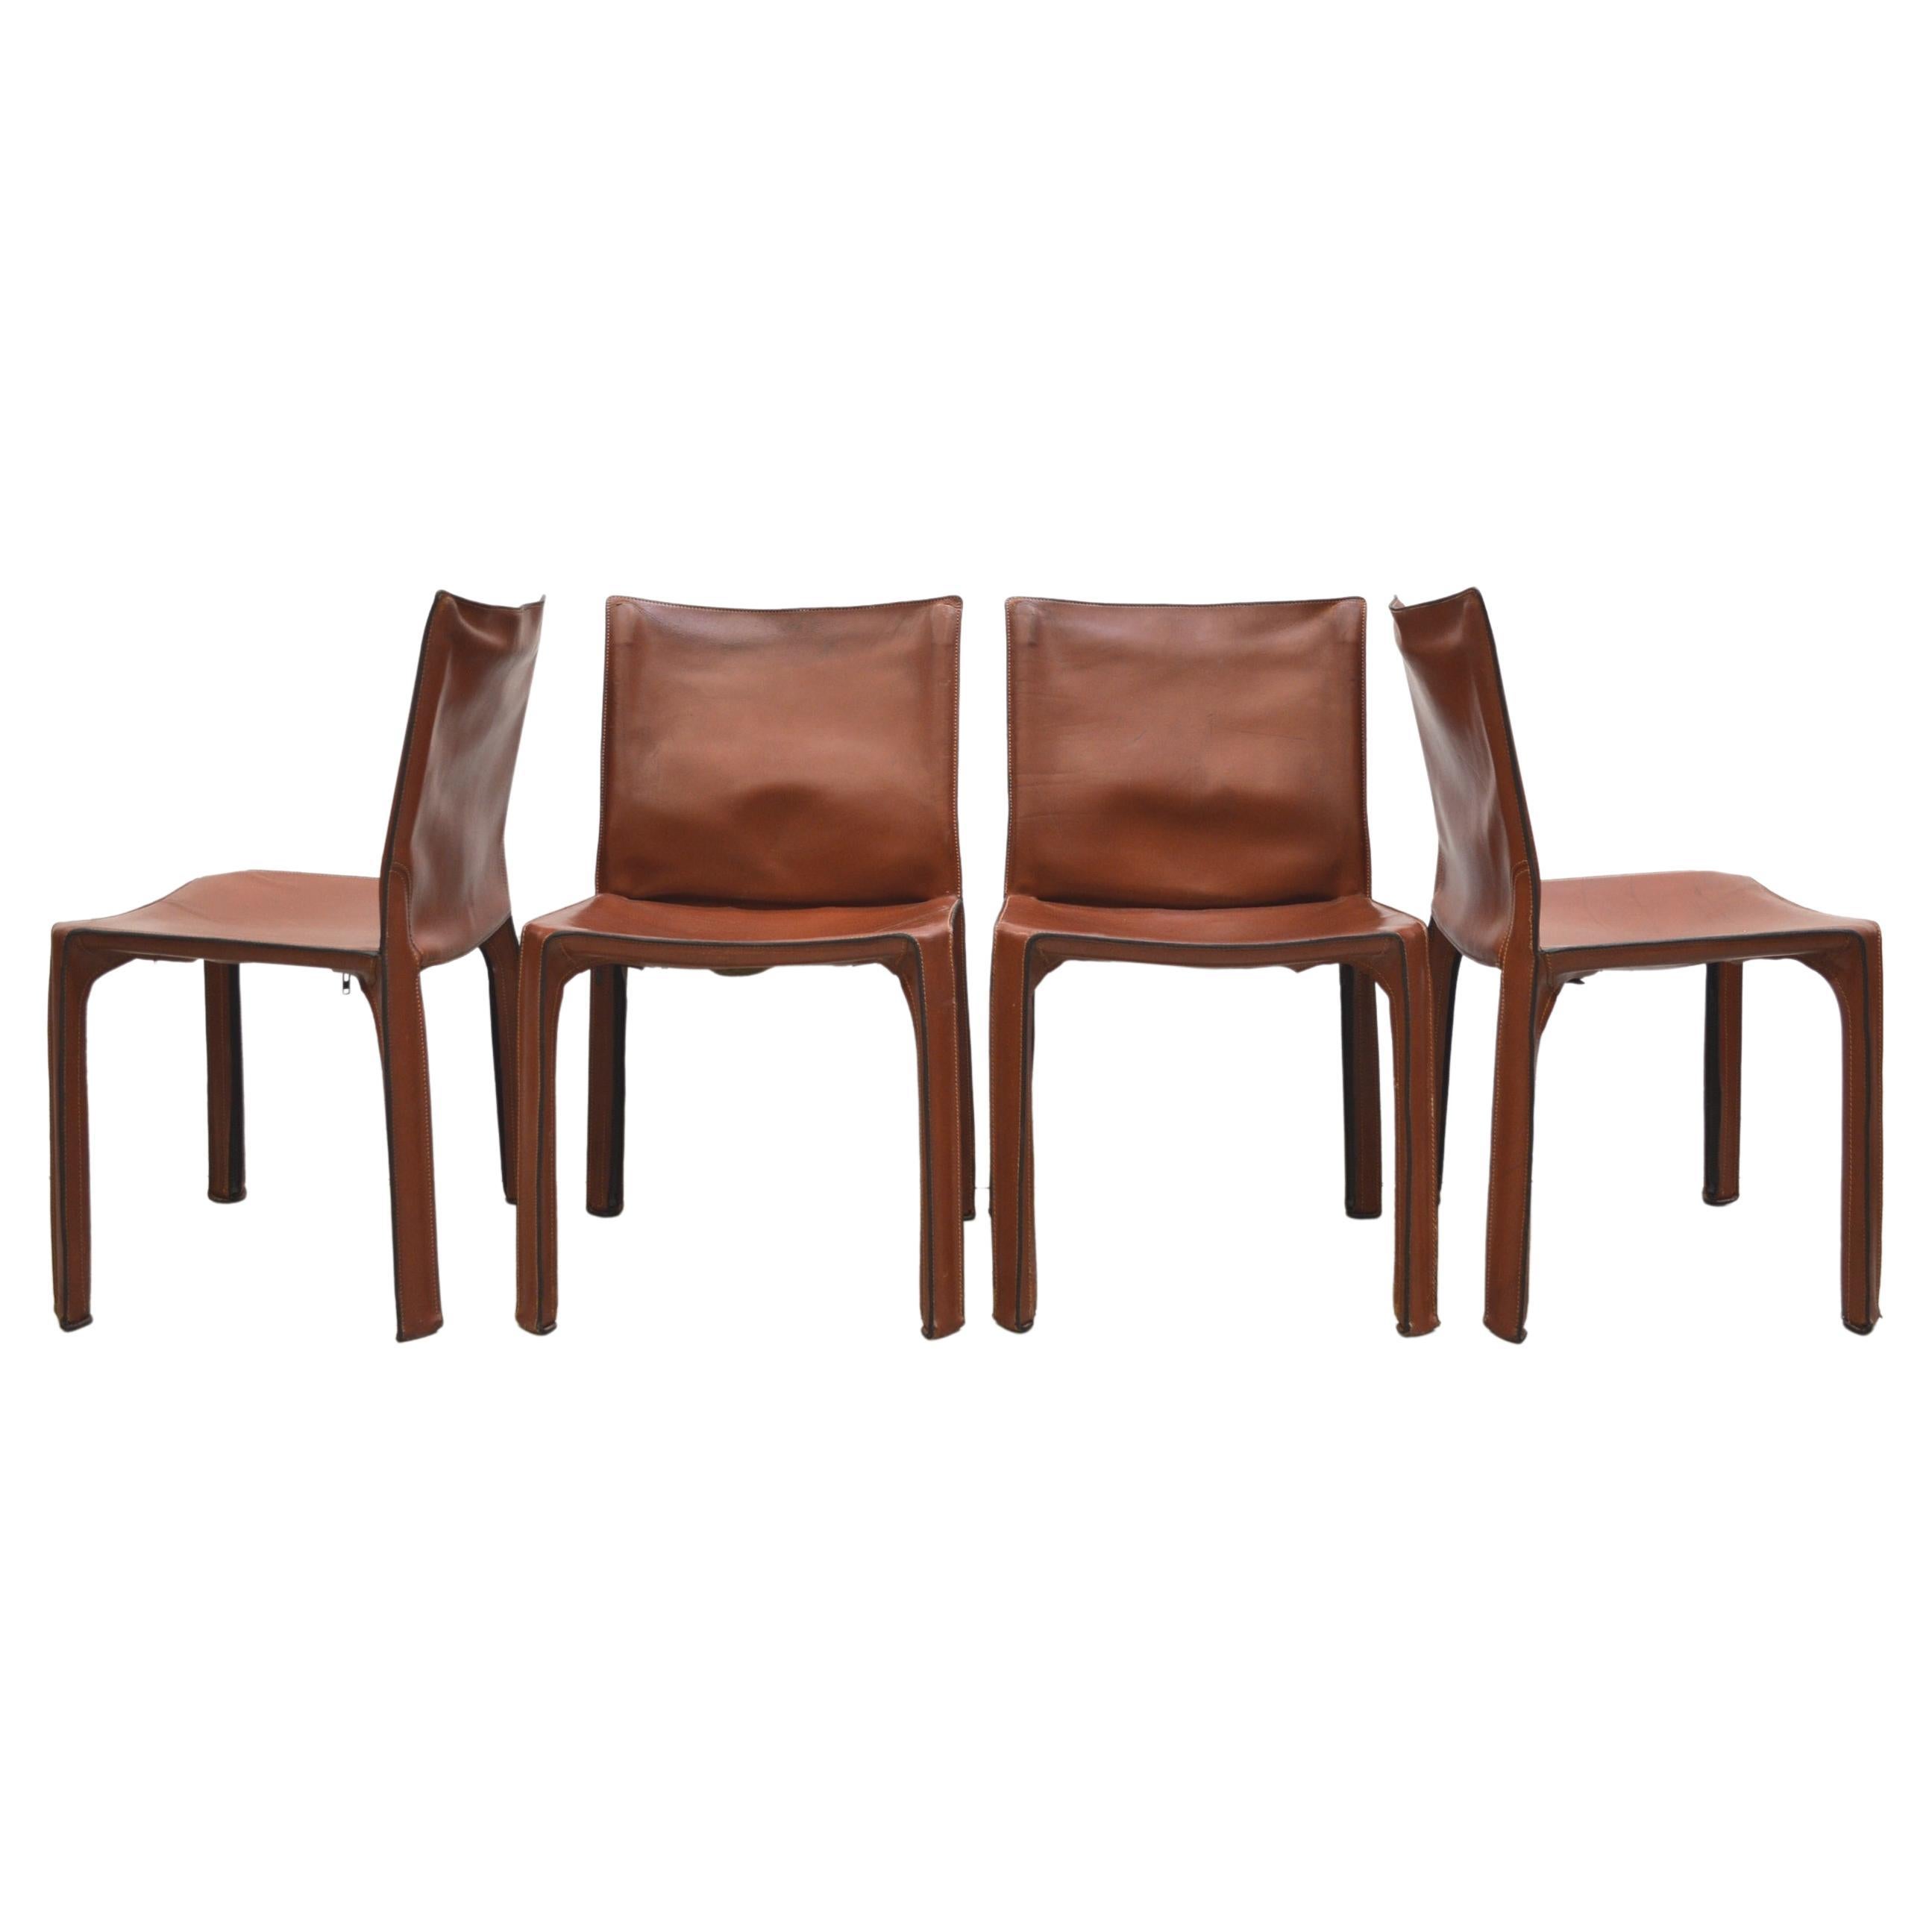 Set of 4 Cab Chair 412 by Mario Bellini for Cassina Cognac Leather